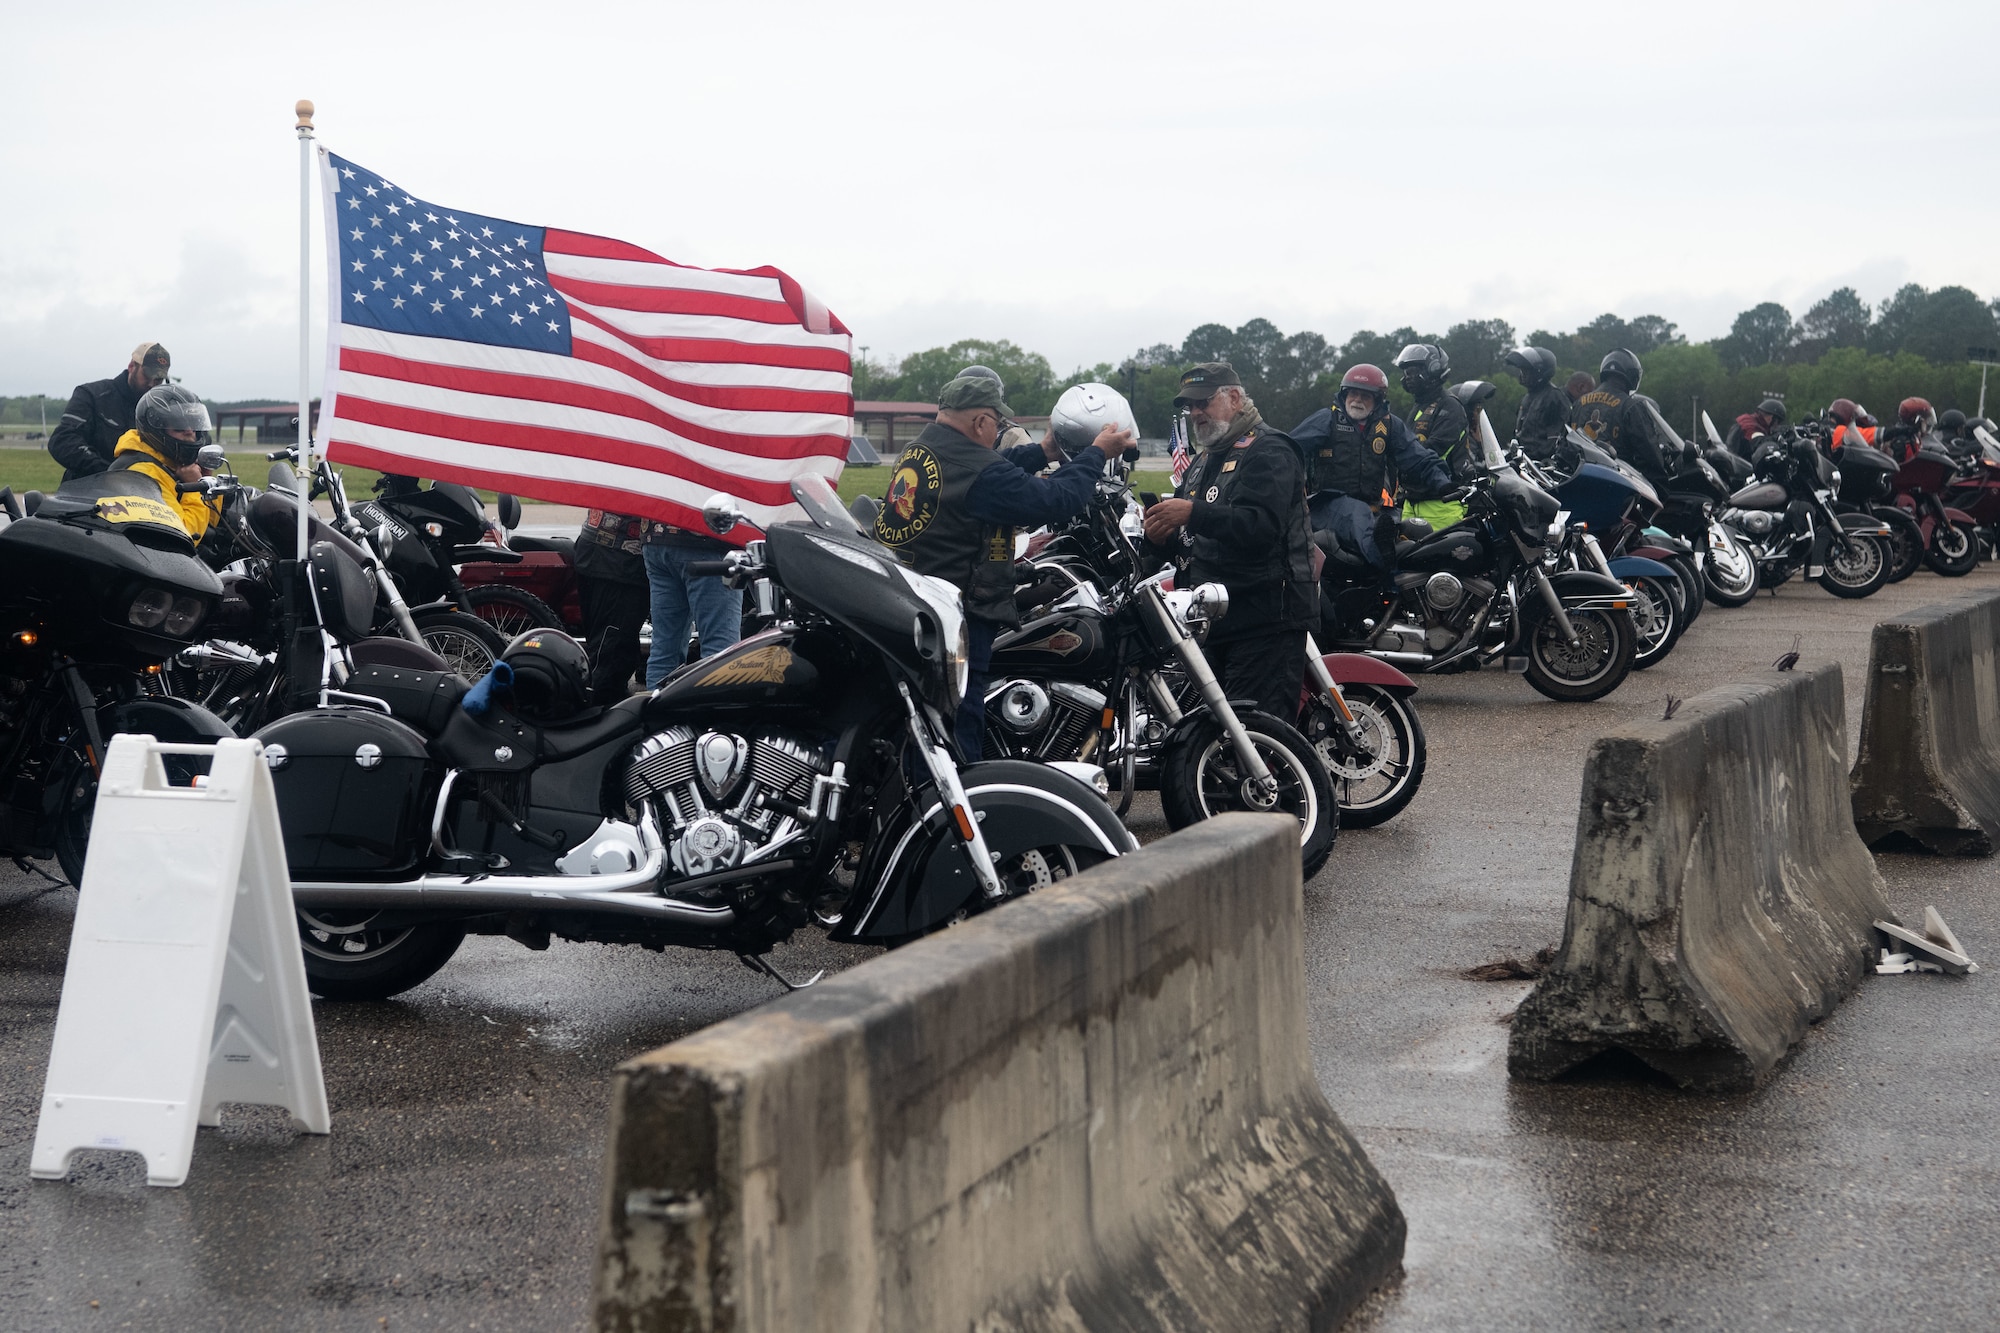 The 42nd Air Base Wing coordinated a motorcycle ride to escort the Traveling American Veterans Wall March 12, 2023, from Prattville, Ala., to Maxwell Air Force Base. 

Approximately 50 motorcyclists and veterans from across the River Region and Alabama participated in the escort ride. 

The installation will host a series of events during Operation Welcome Home March 13 - 15 to celebrate, reflect and educate the community on the contributions of American veterans.